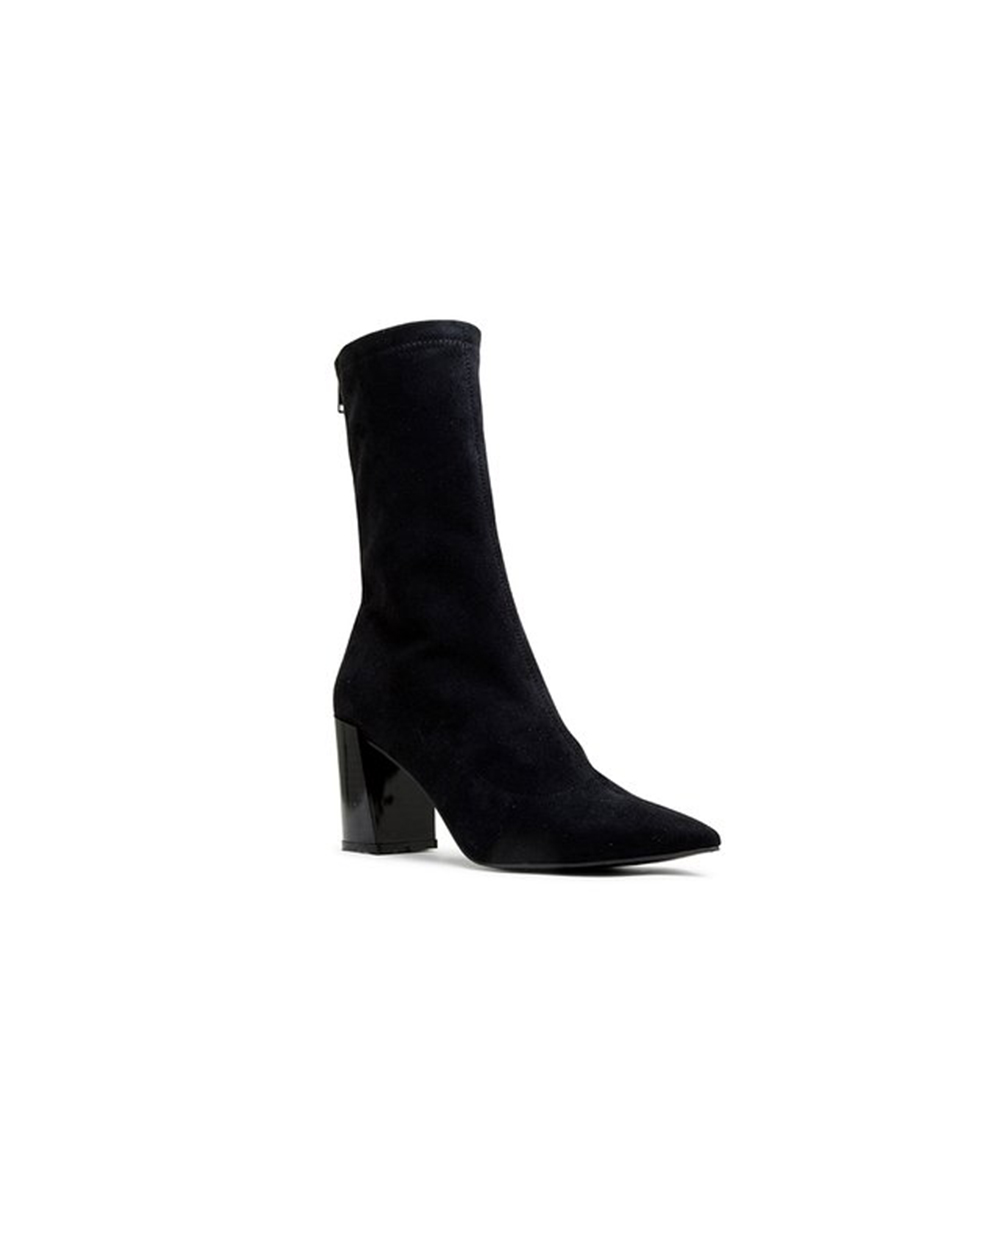 Aurora Ankle Boot, $219.90, from Merchant 1948